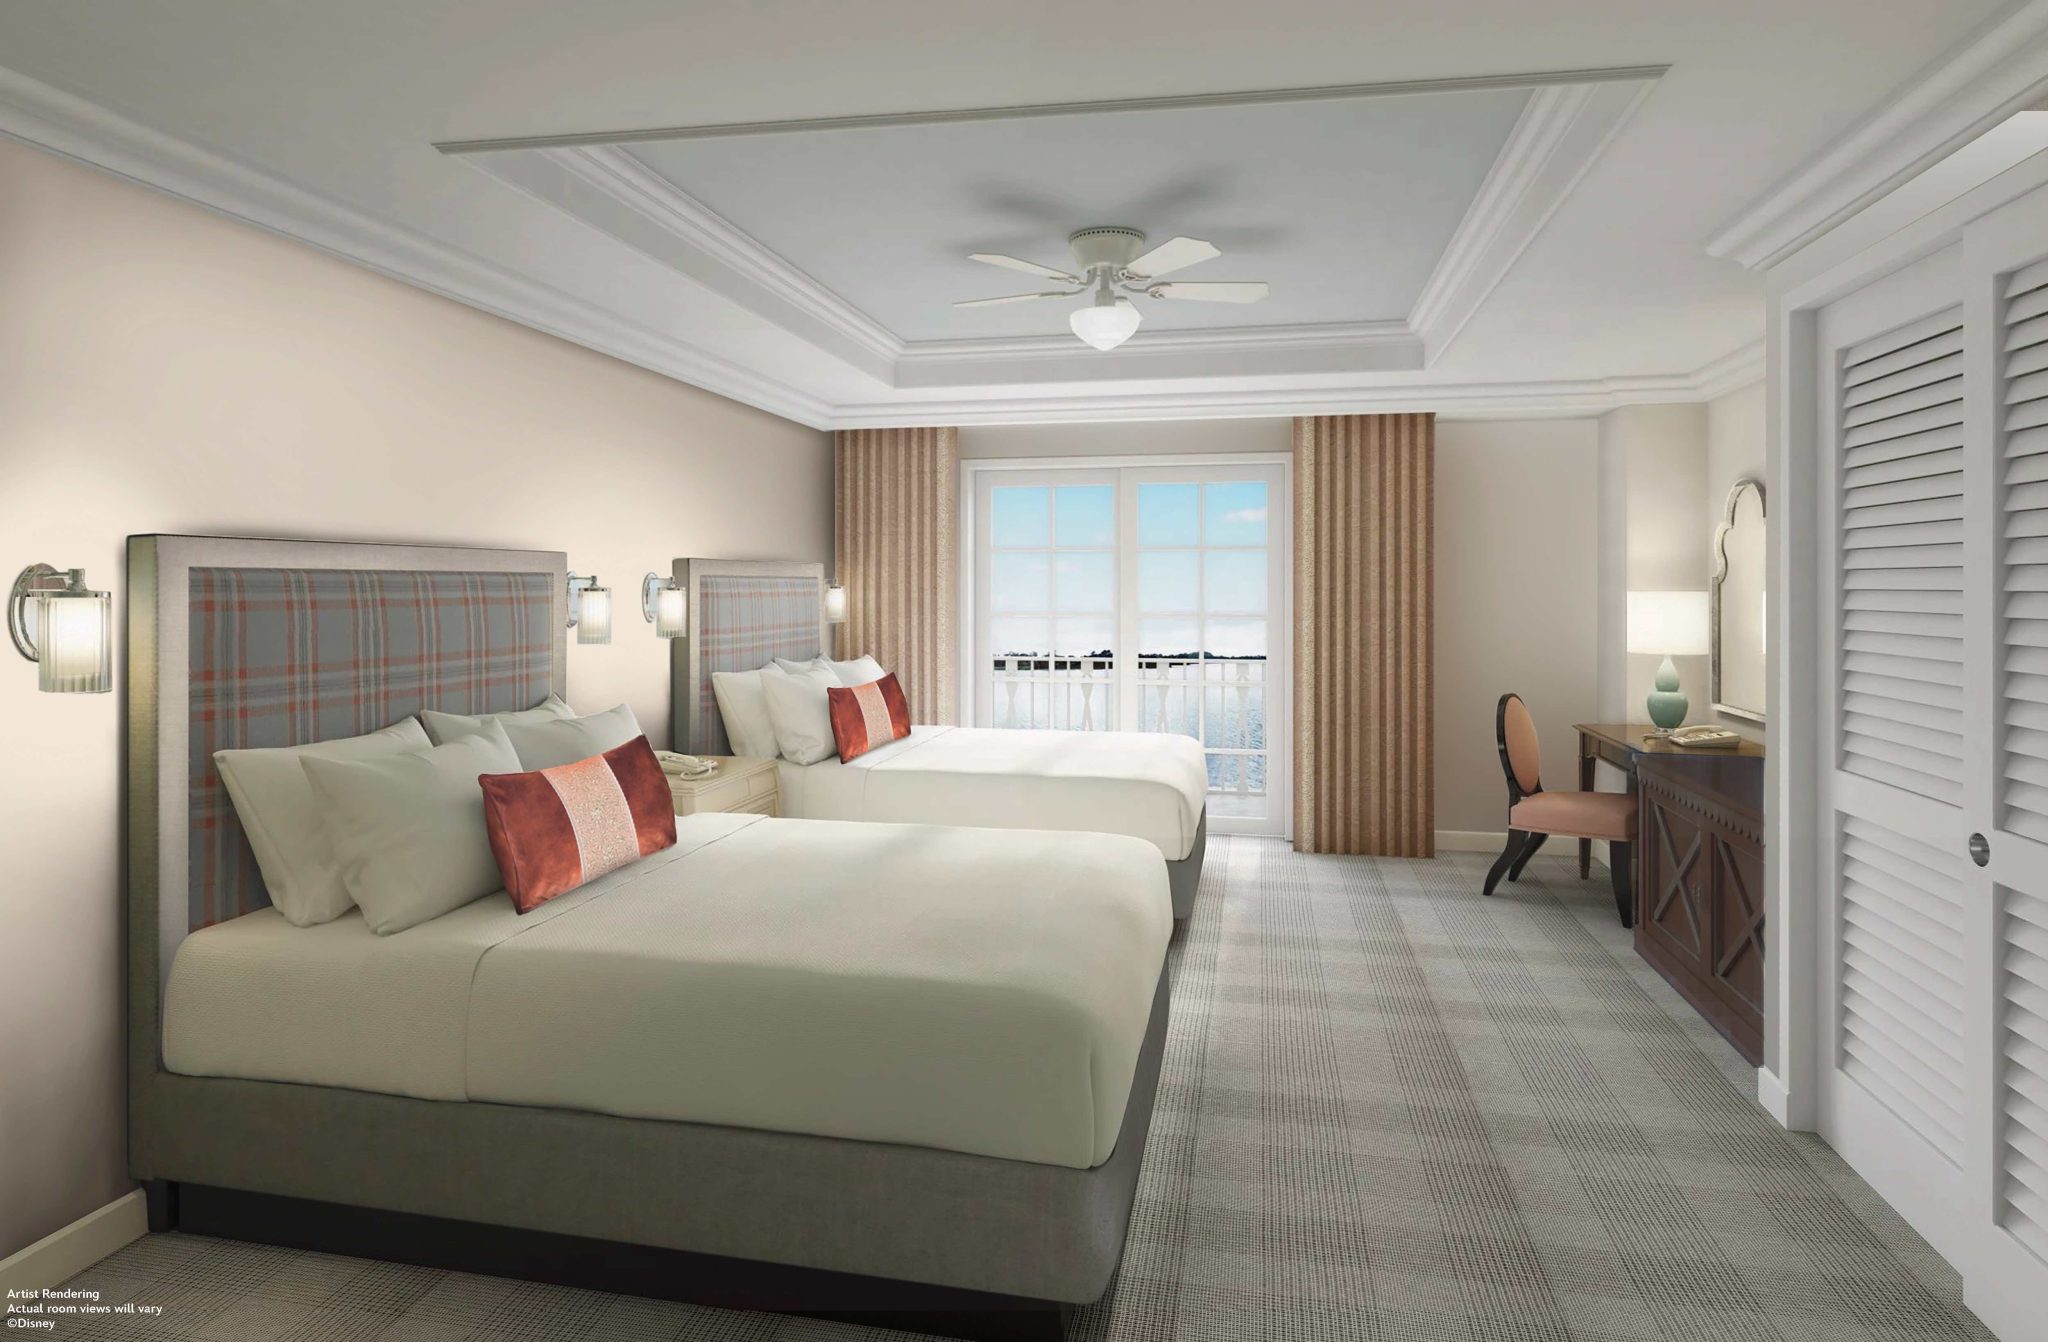 2021 Wdw Walt Disney World Disneys Grand Floridian Resort And Spa Disney Vacation Club New And Updated Rooms Queen Room 2048x1342 